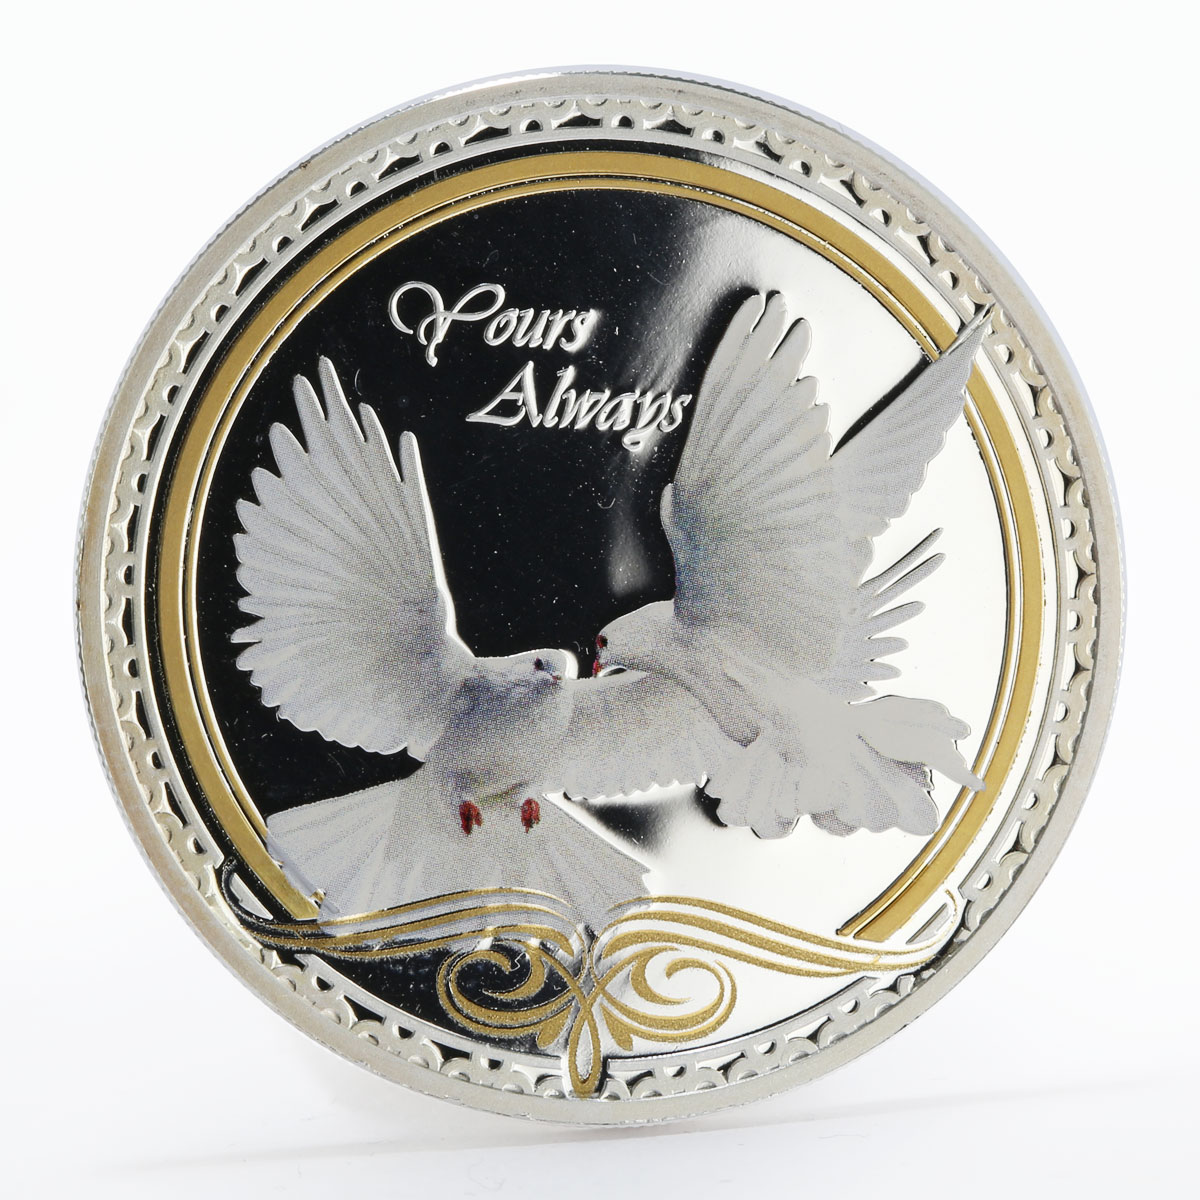 Tokelau 5 dollars Dove Pigeon Yours Always colored gilded proof silver coin 2014